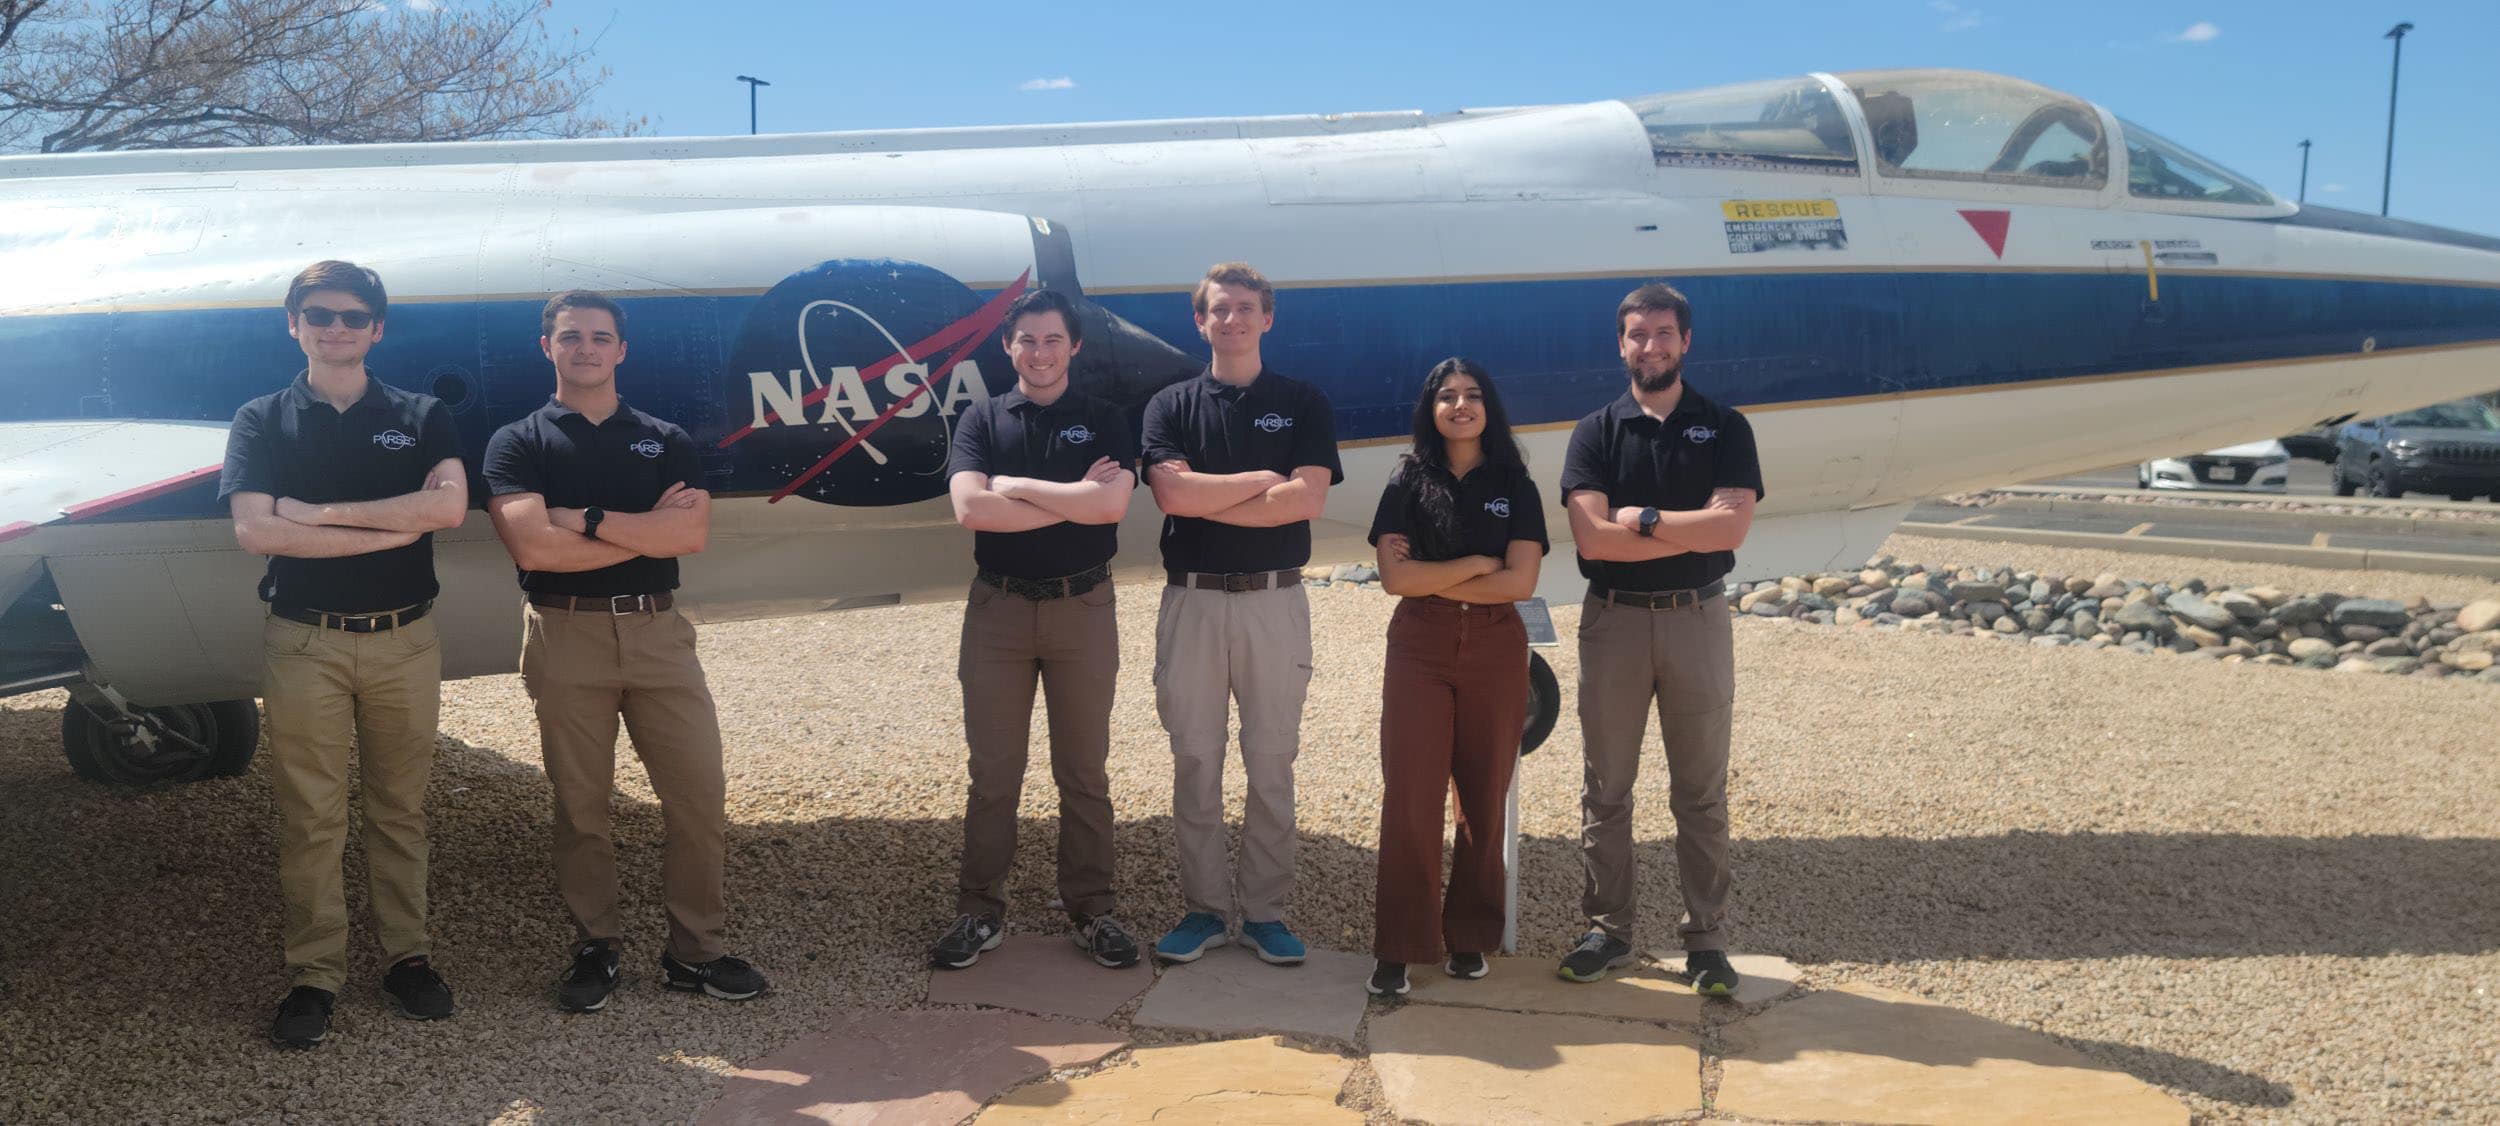 Students stand by a plane.